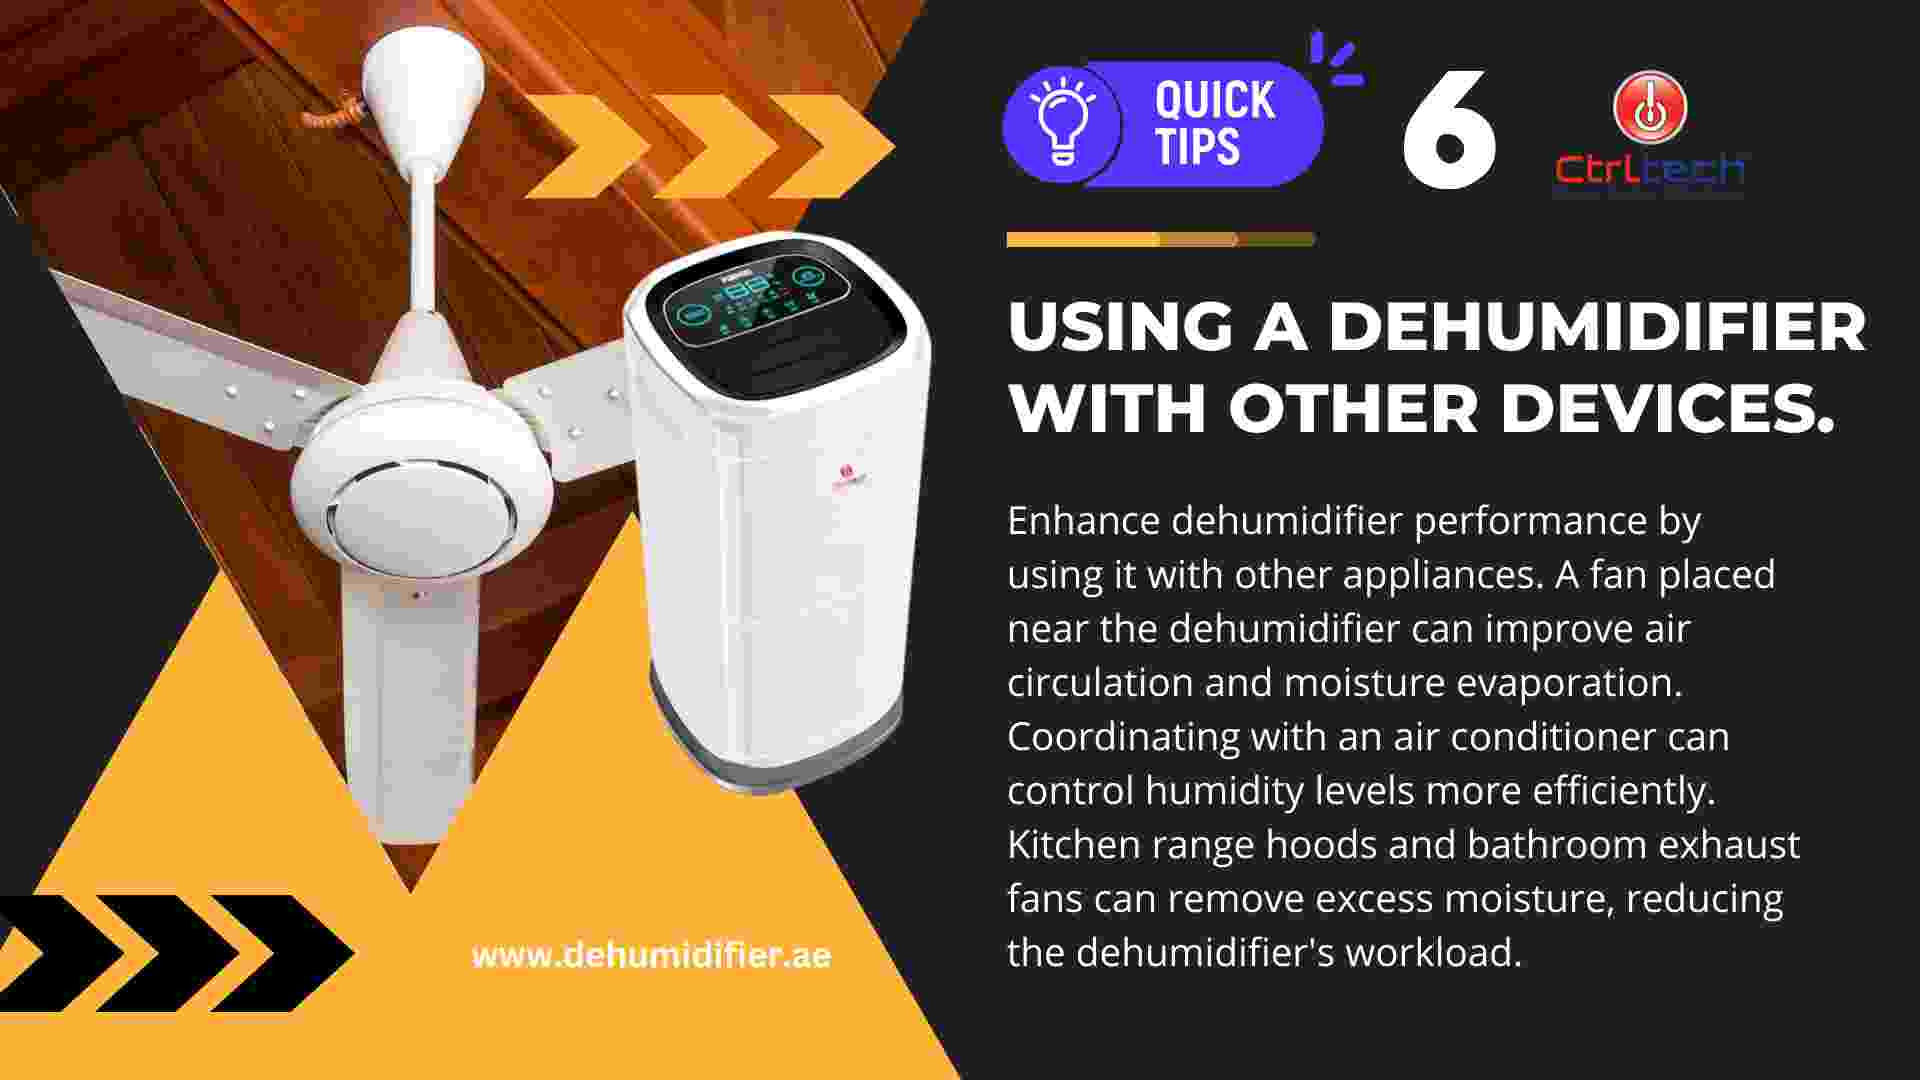 Tip 6 - Use a Dehumidifier with Other Appliances